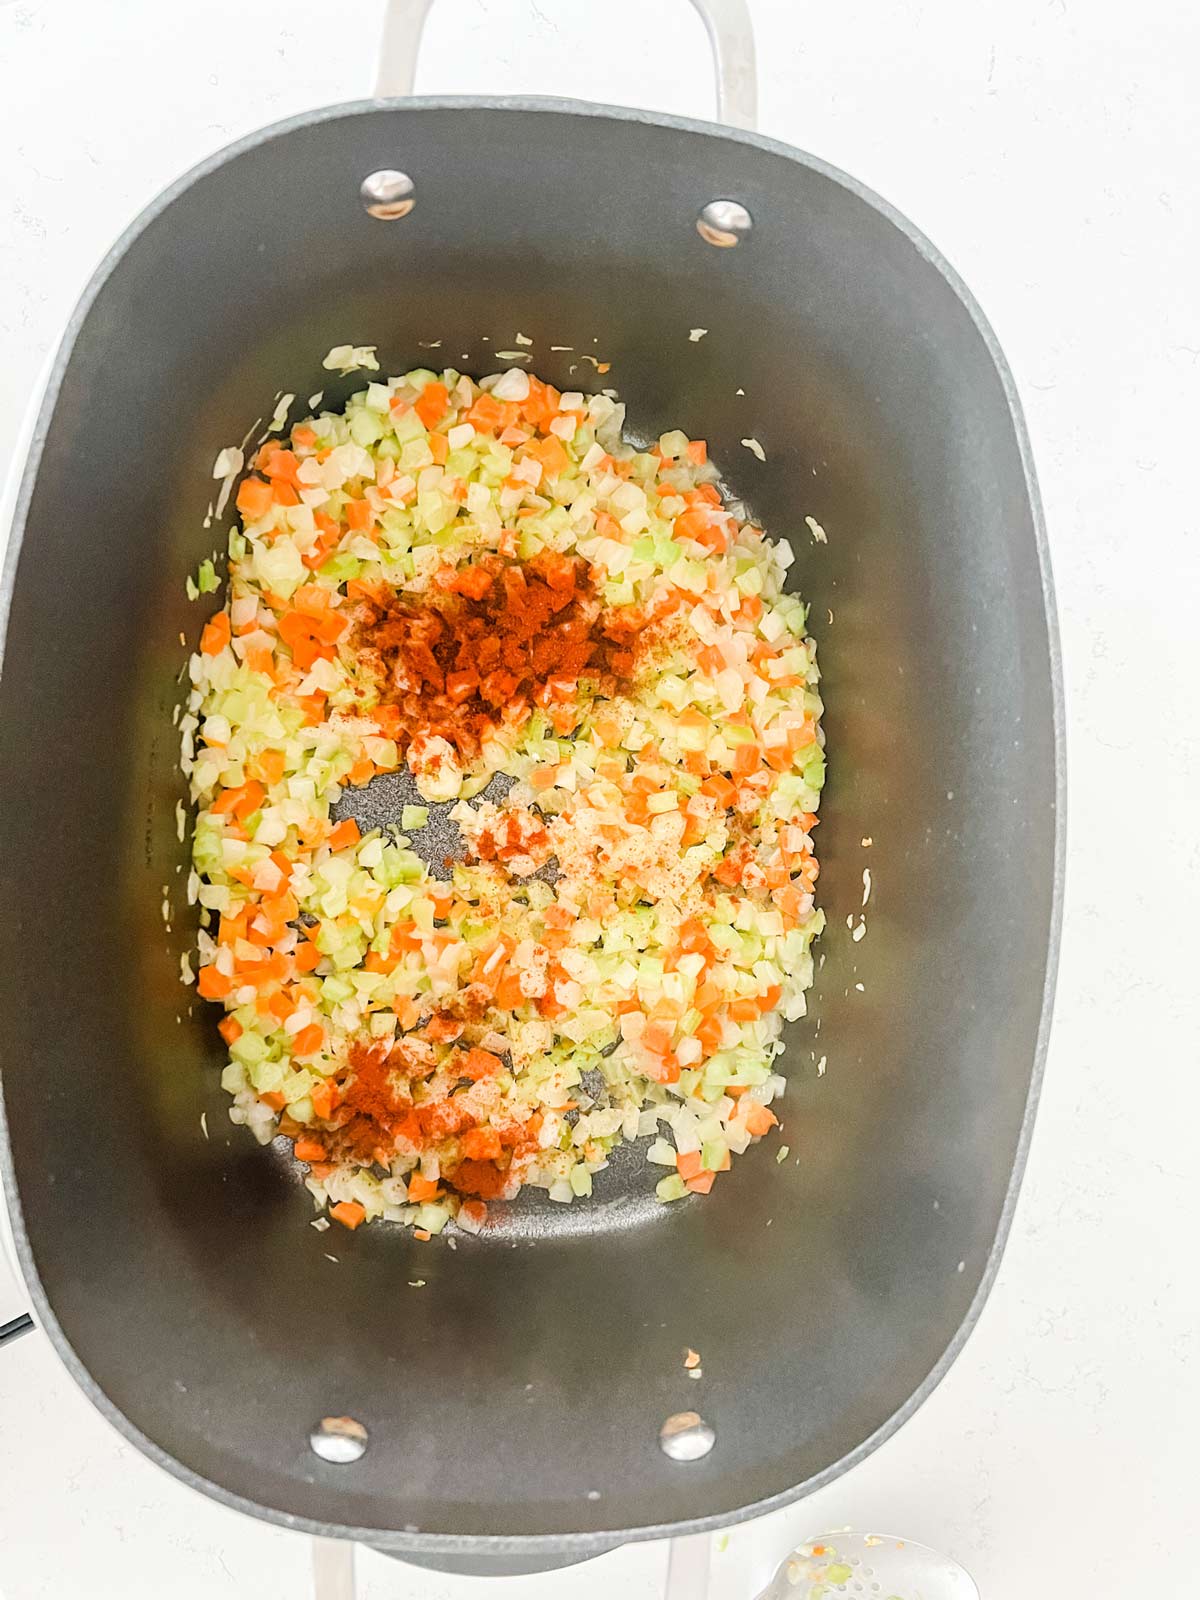 Photo of seasonings sprinkled on top of sauteed onion, celery, and carrots.